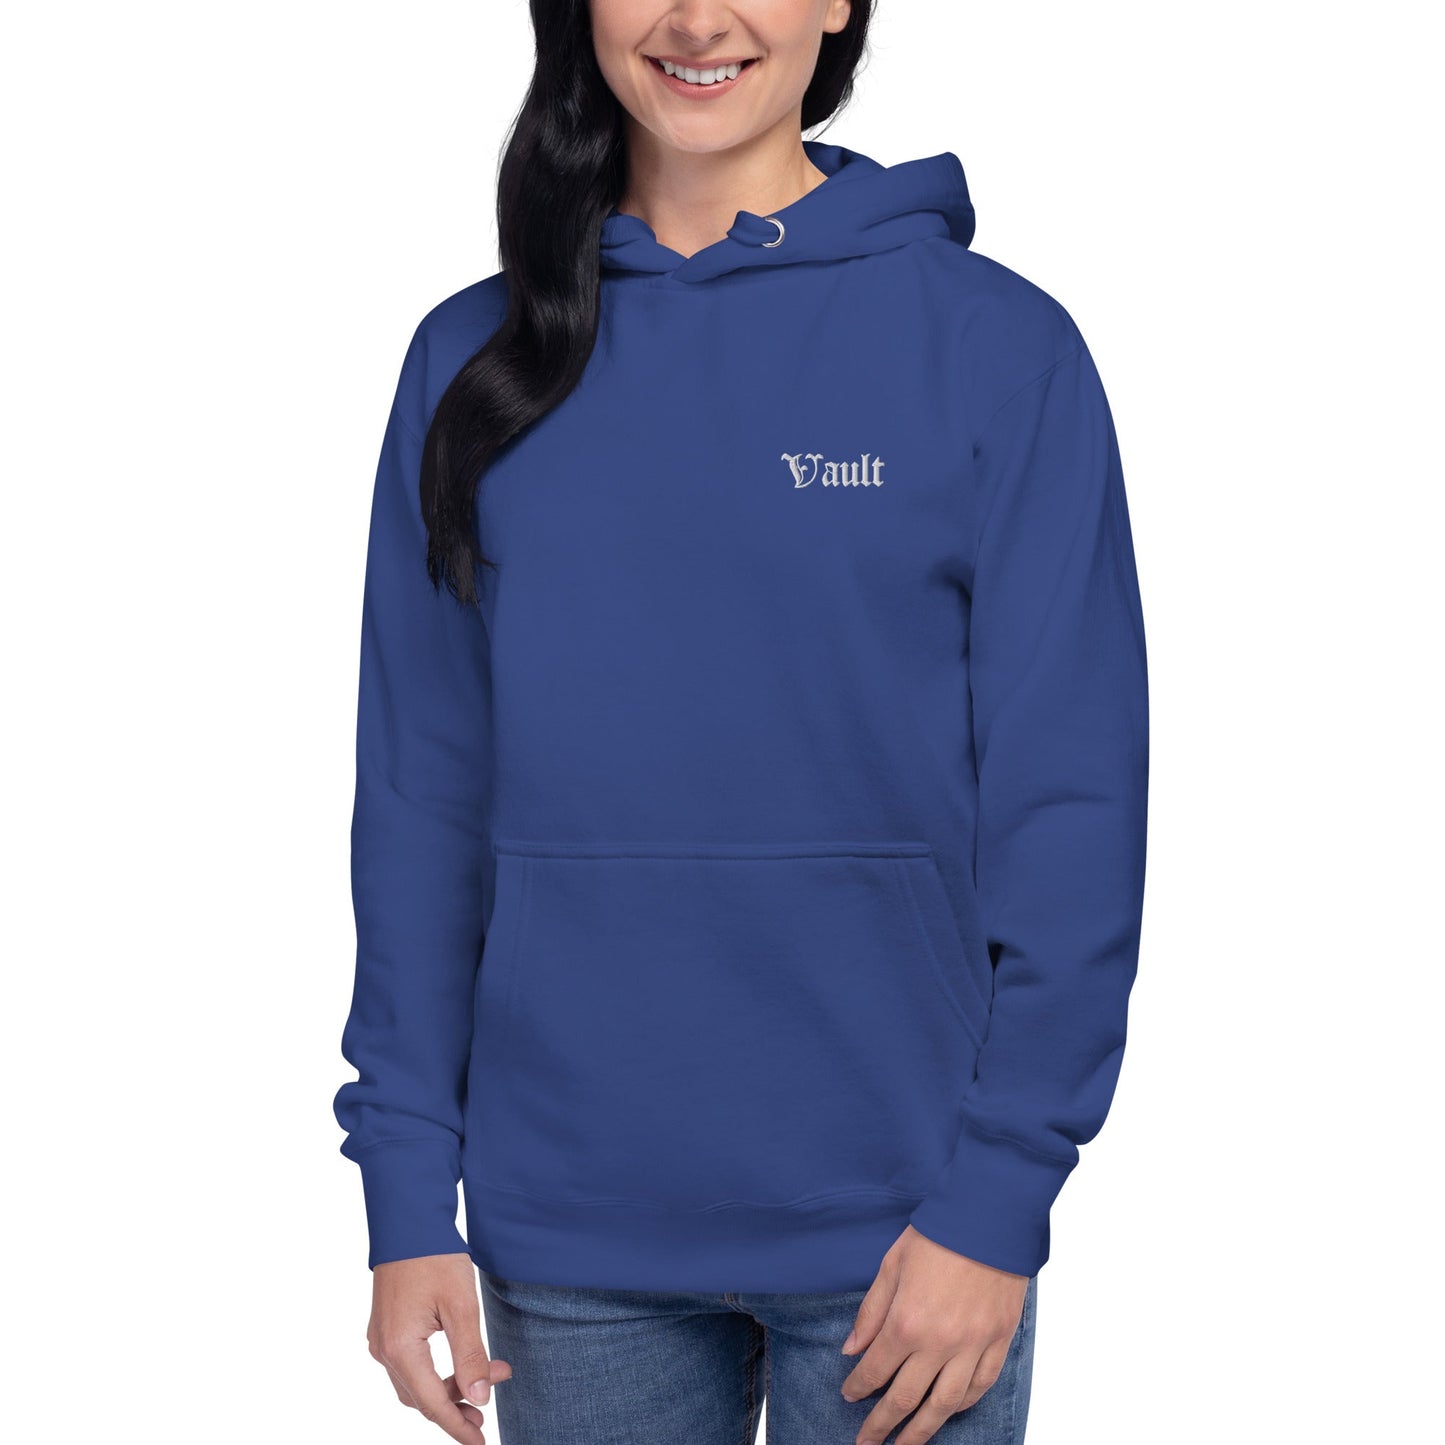 Vault Women's Old E Embroidered Hoodie - Multiple Colors - Vault Board Shop Vault Board Shop